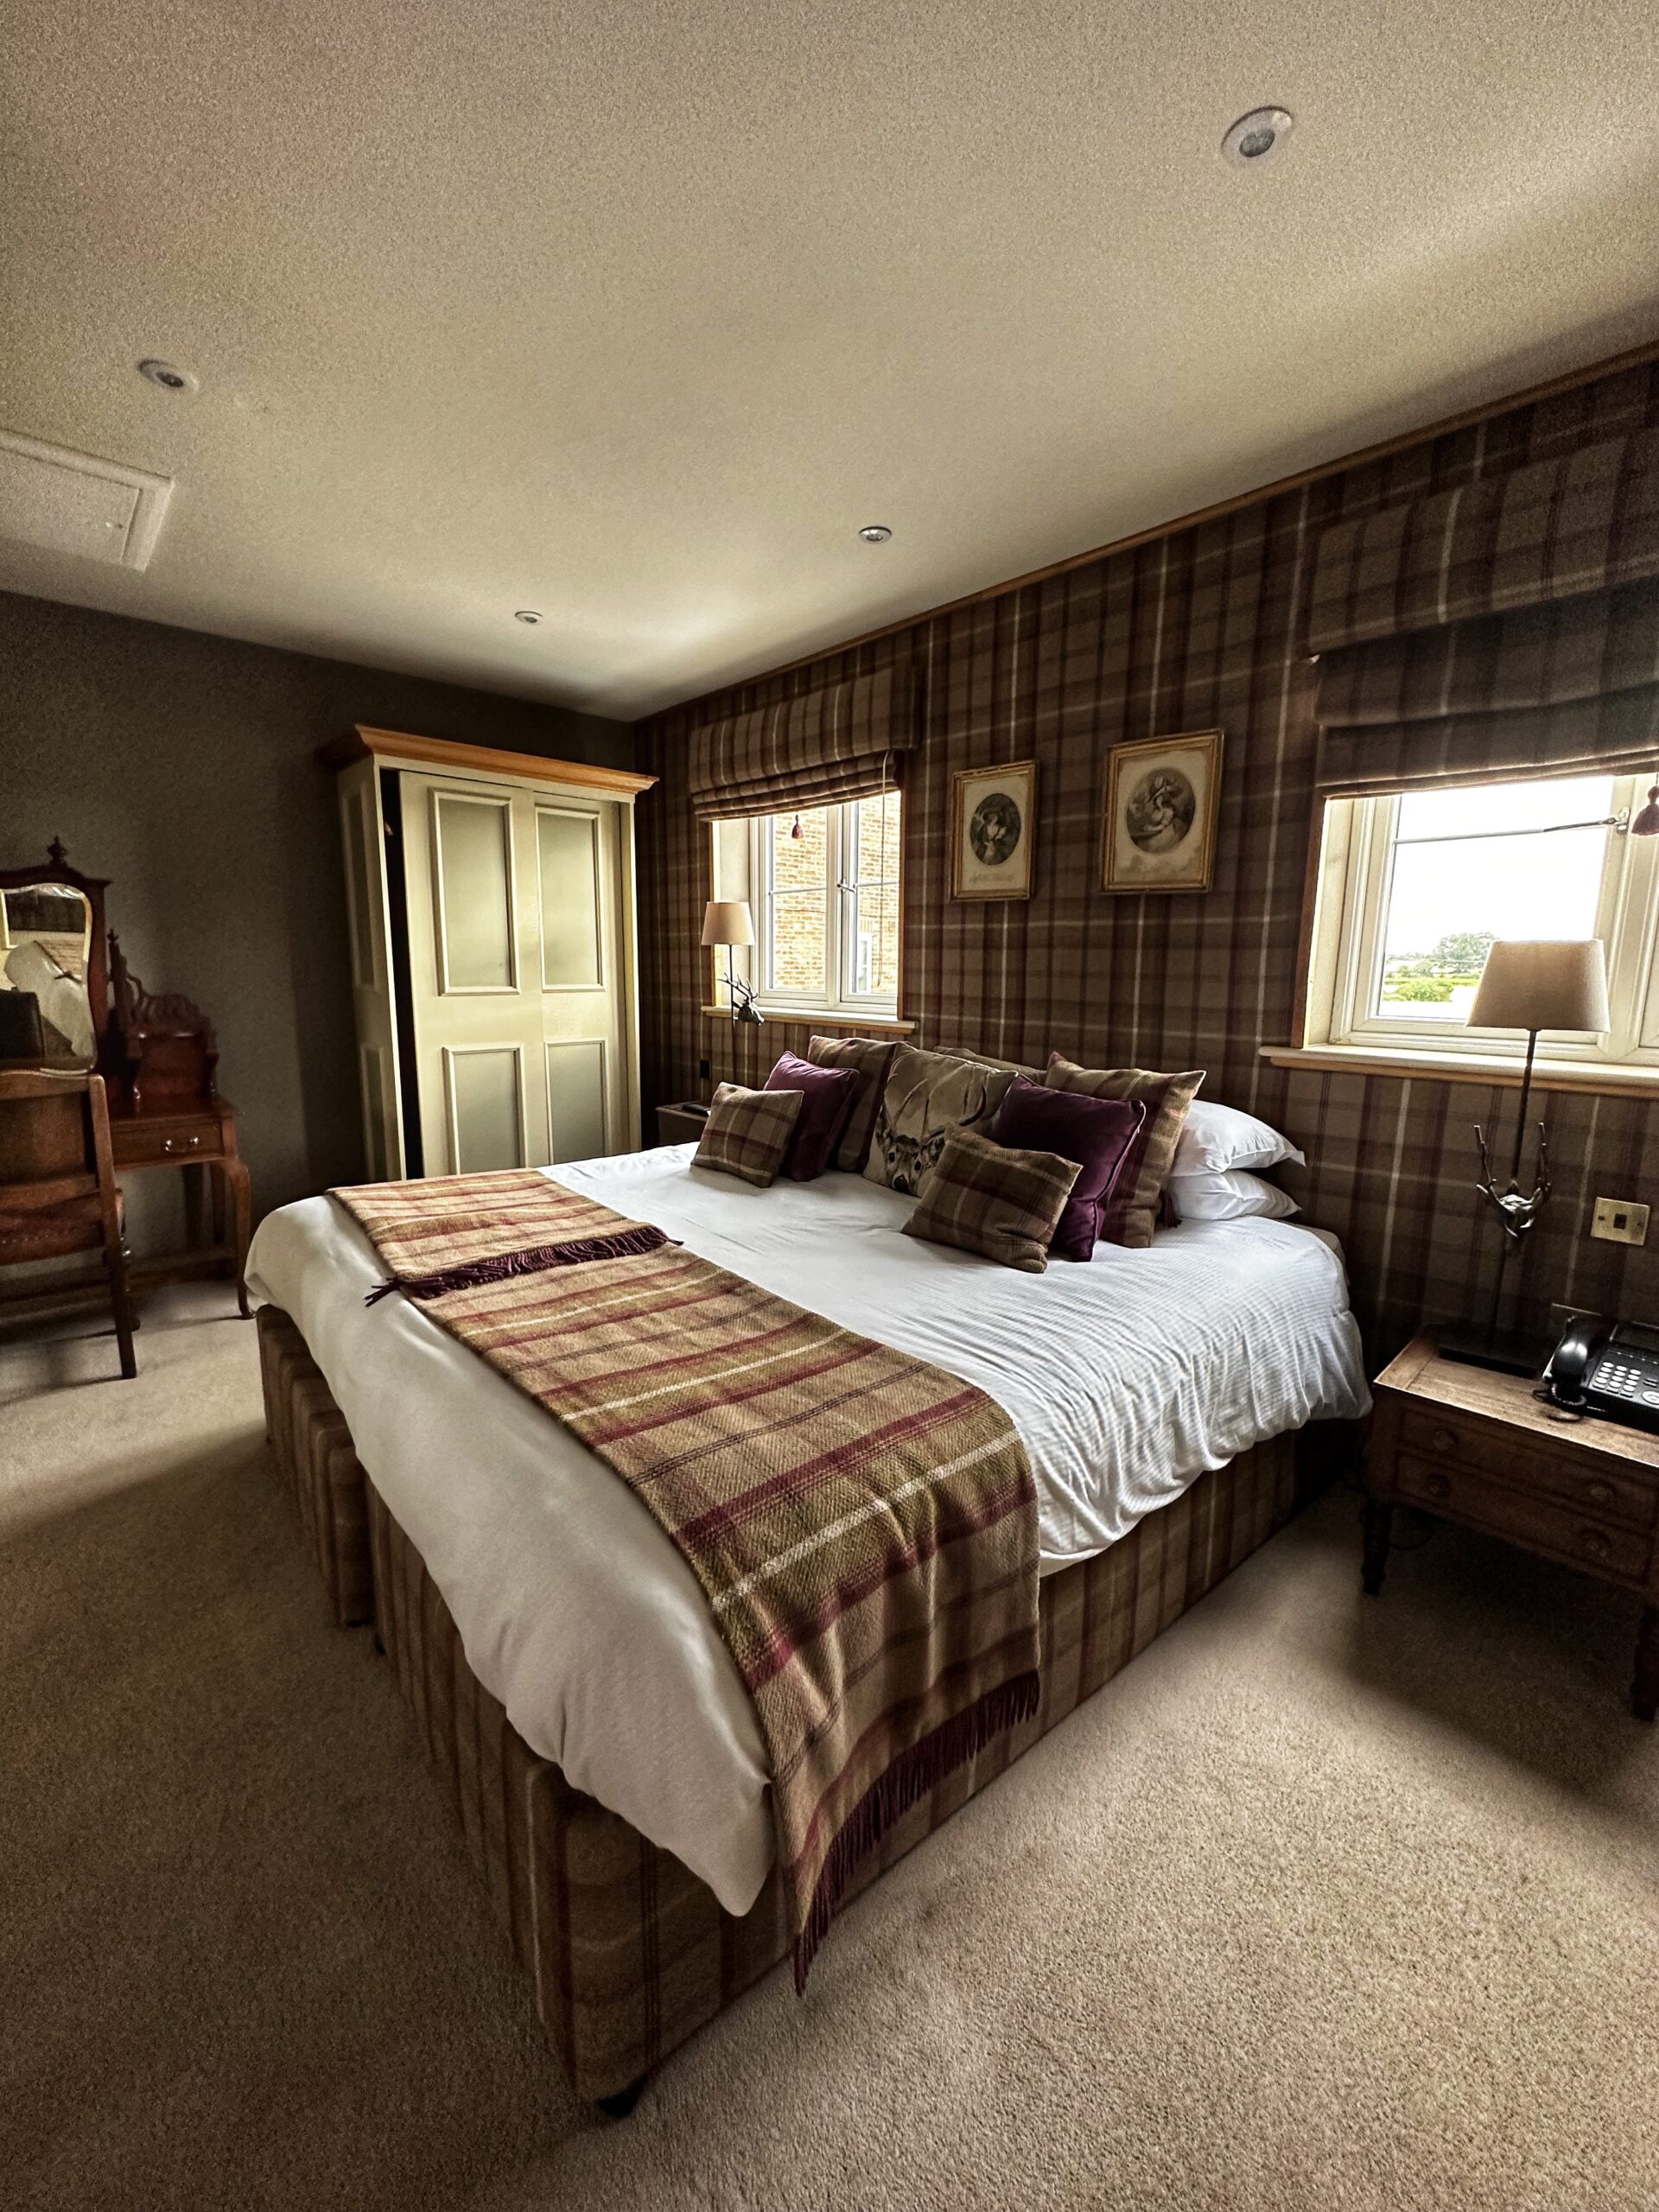 Rooms at Ye Olde Bell spa hotel